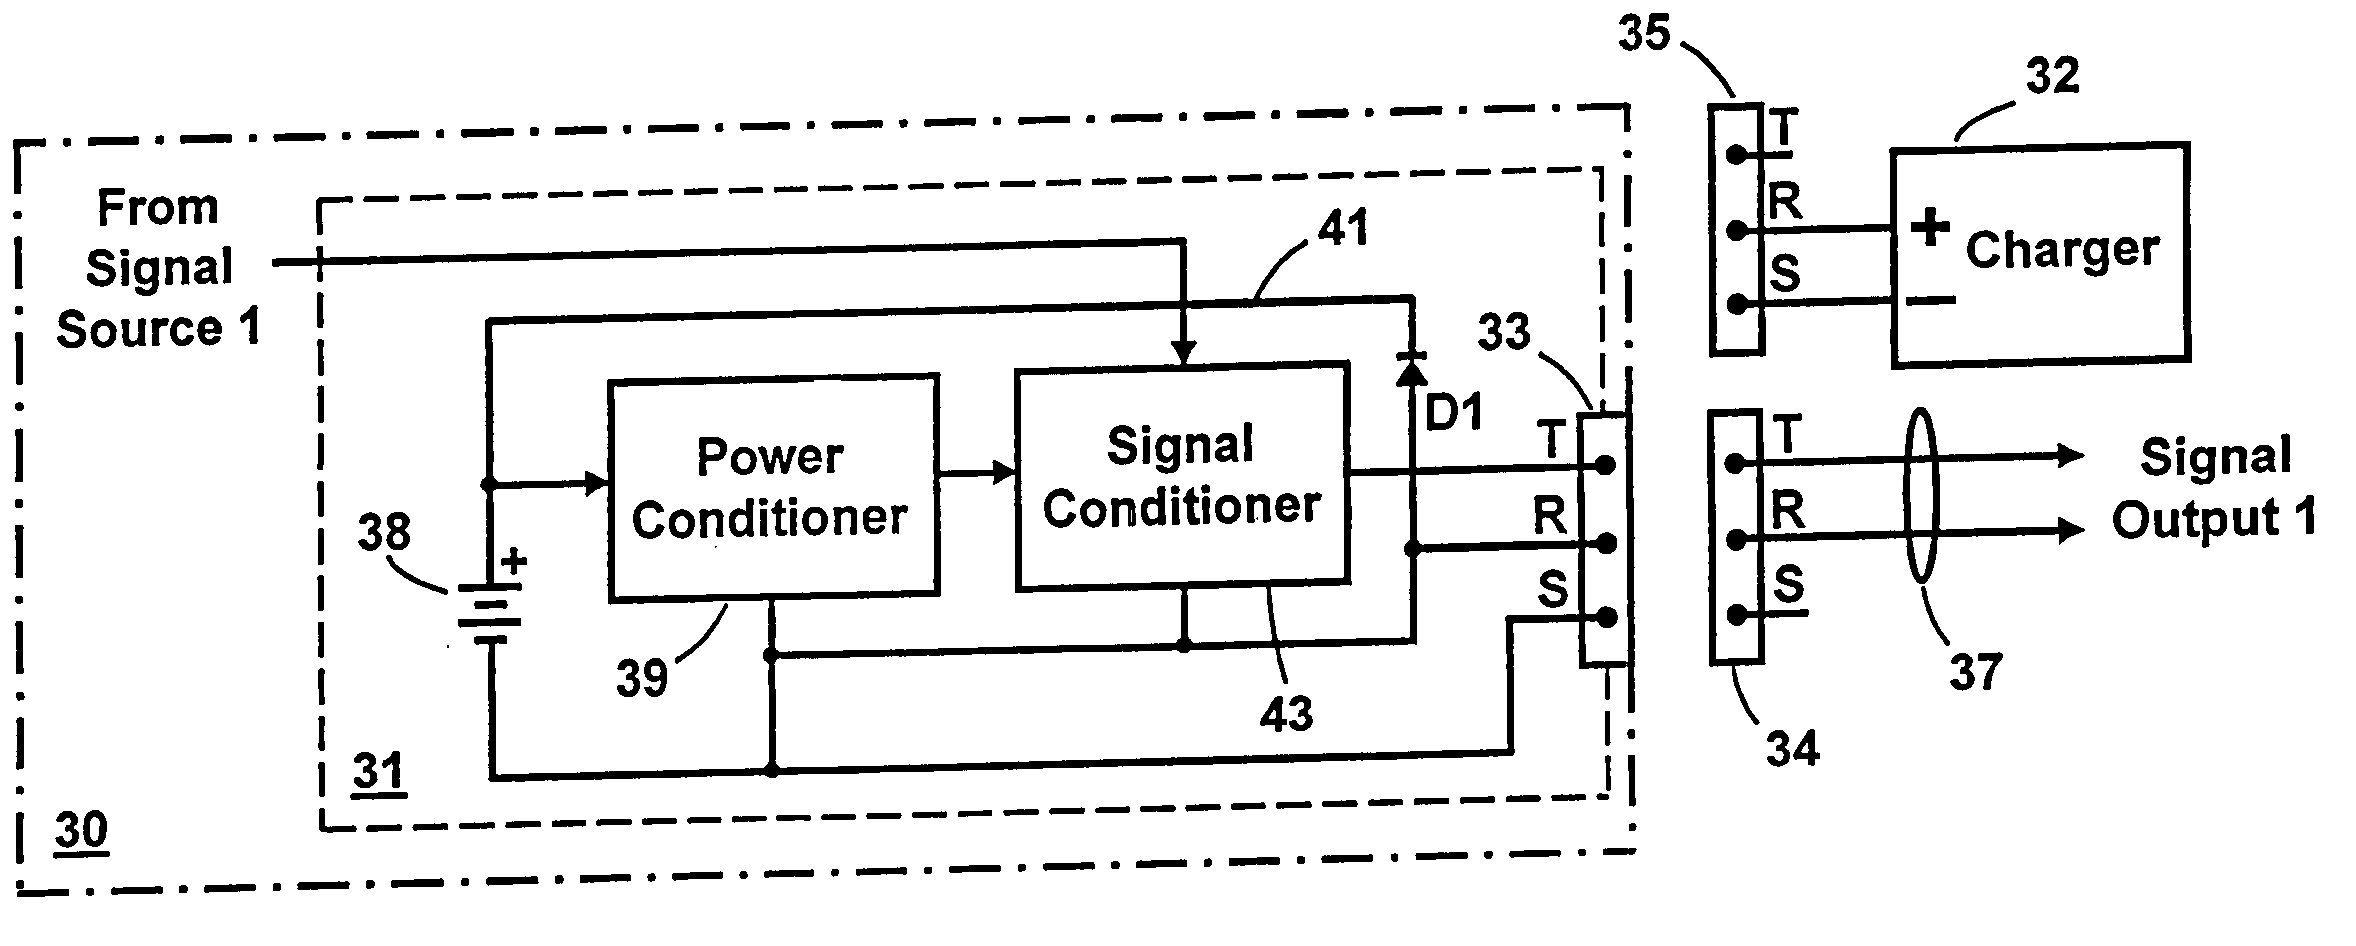 Apparatus for powering an electronic musical instrument